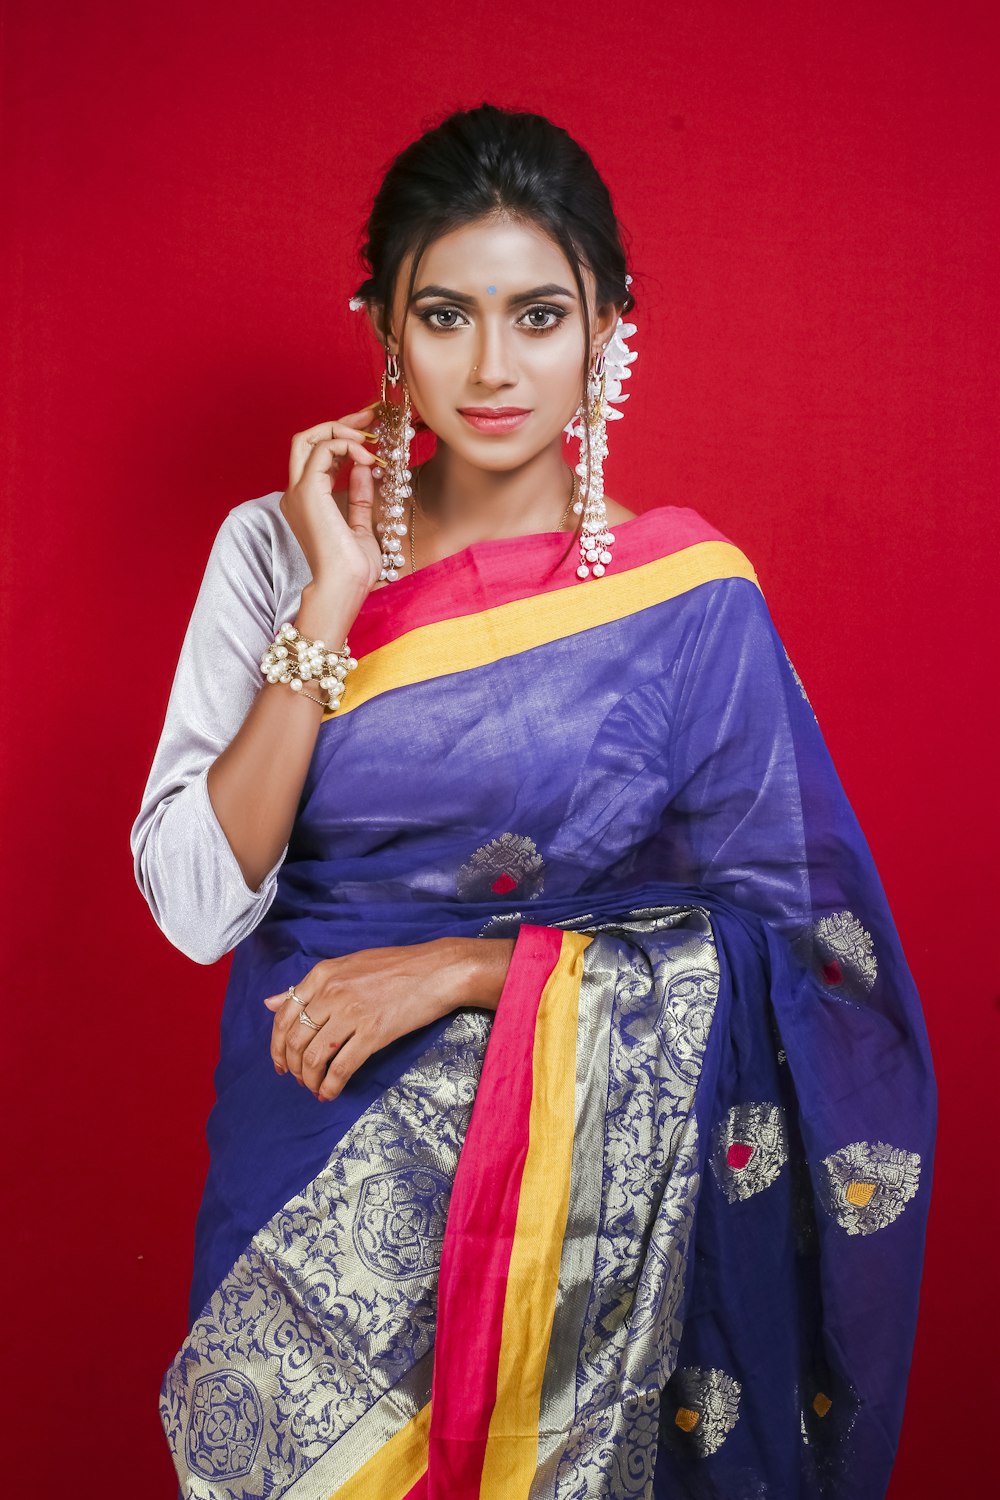 Awe-Inspiring Collection of Full 4K Saree Model Images – Over 999!